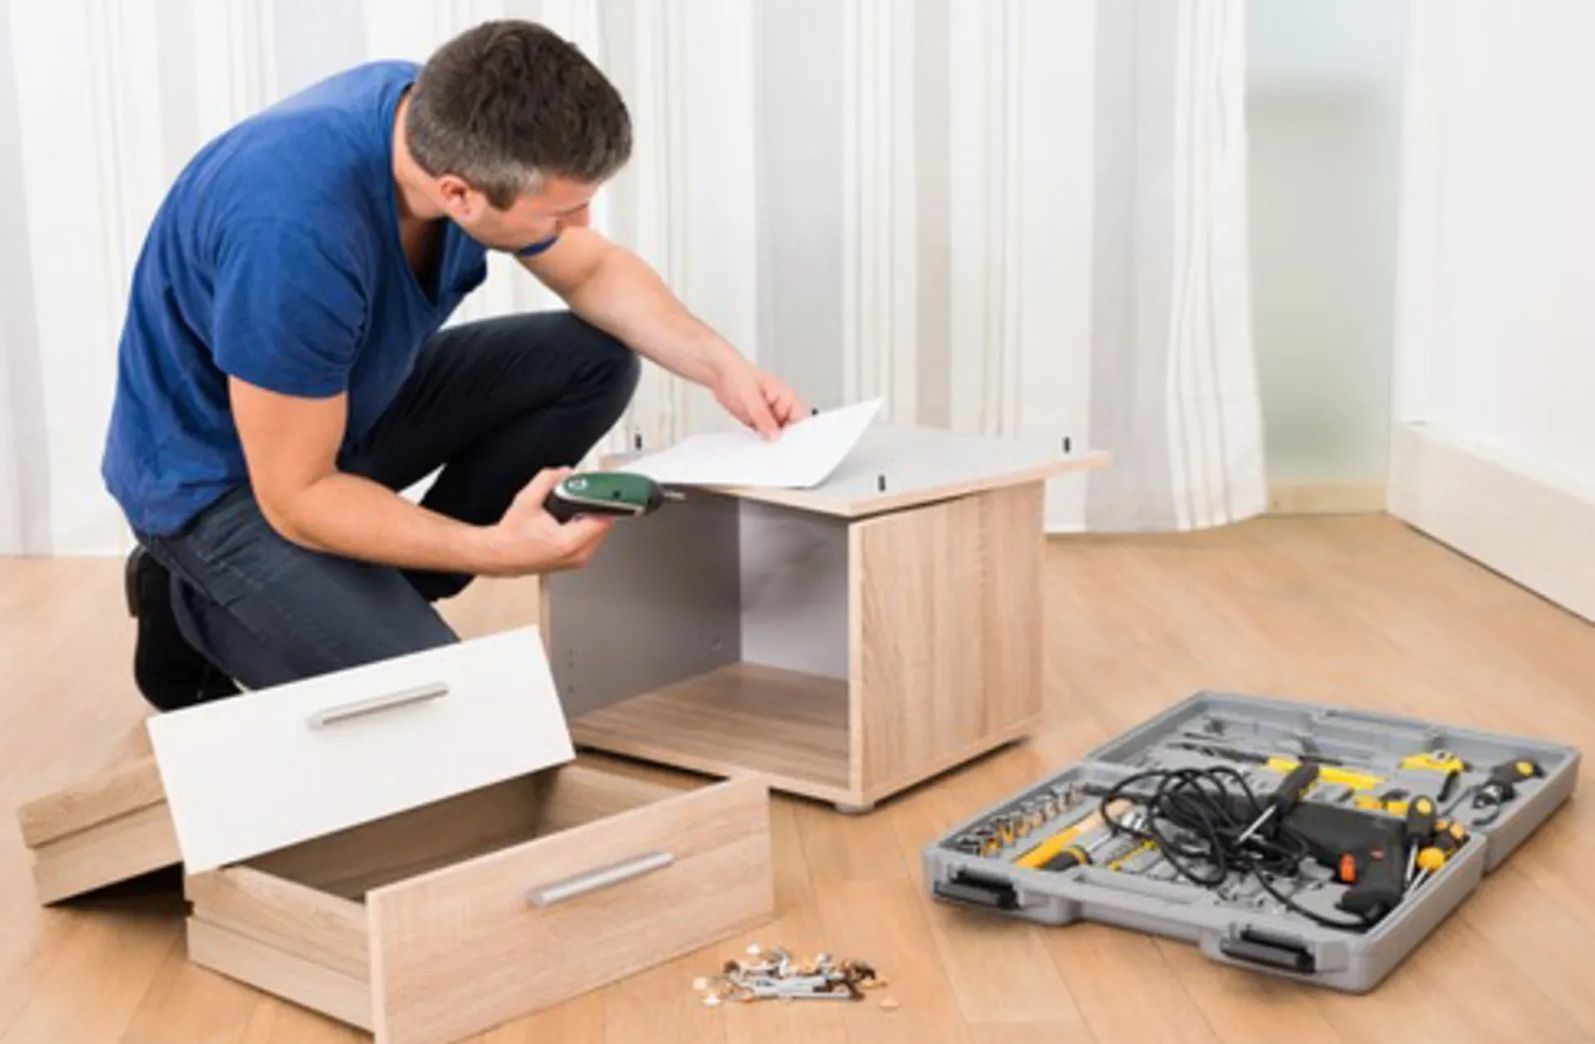 Furniture assembly Services available on Demand